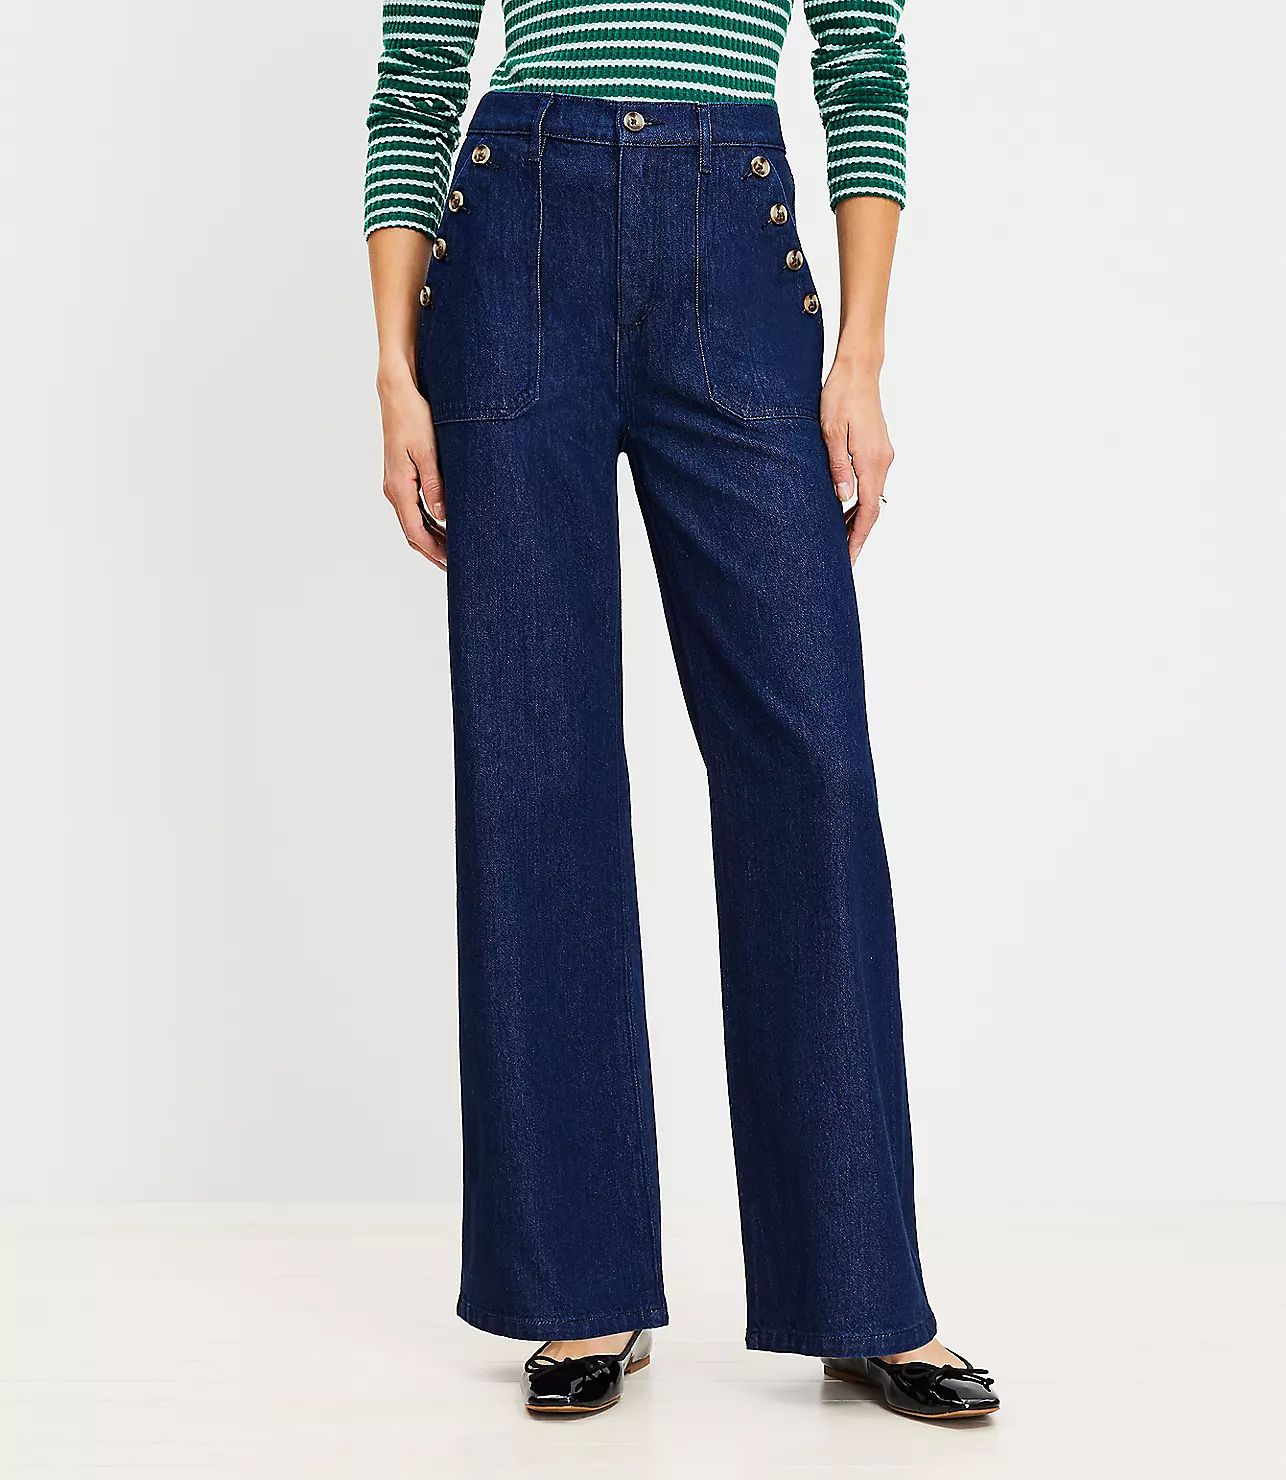 Mariner High Rise Wide Leg Jeans in Rinse Wash | LOFT